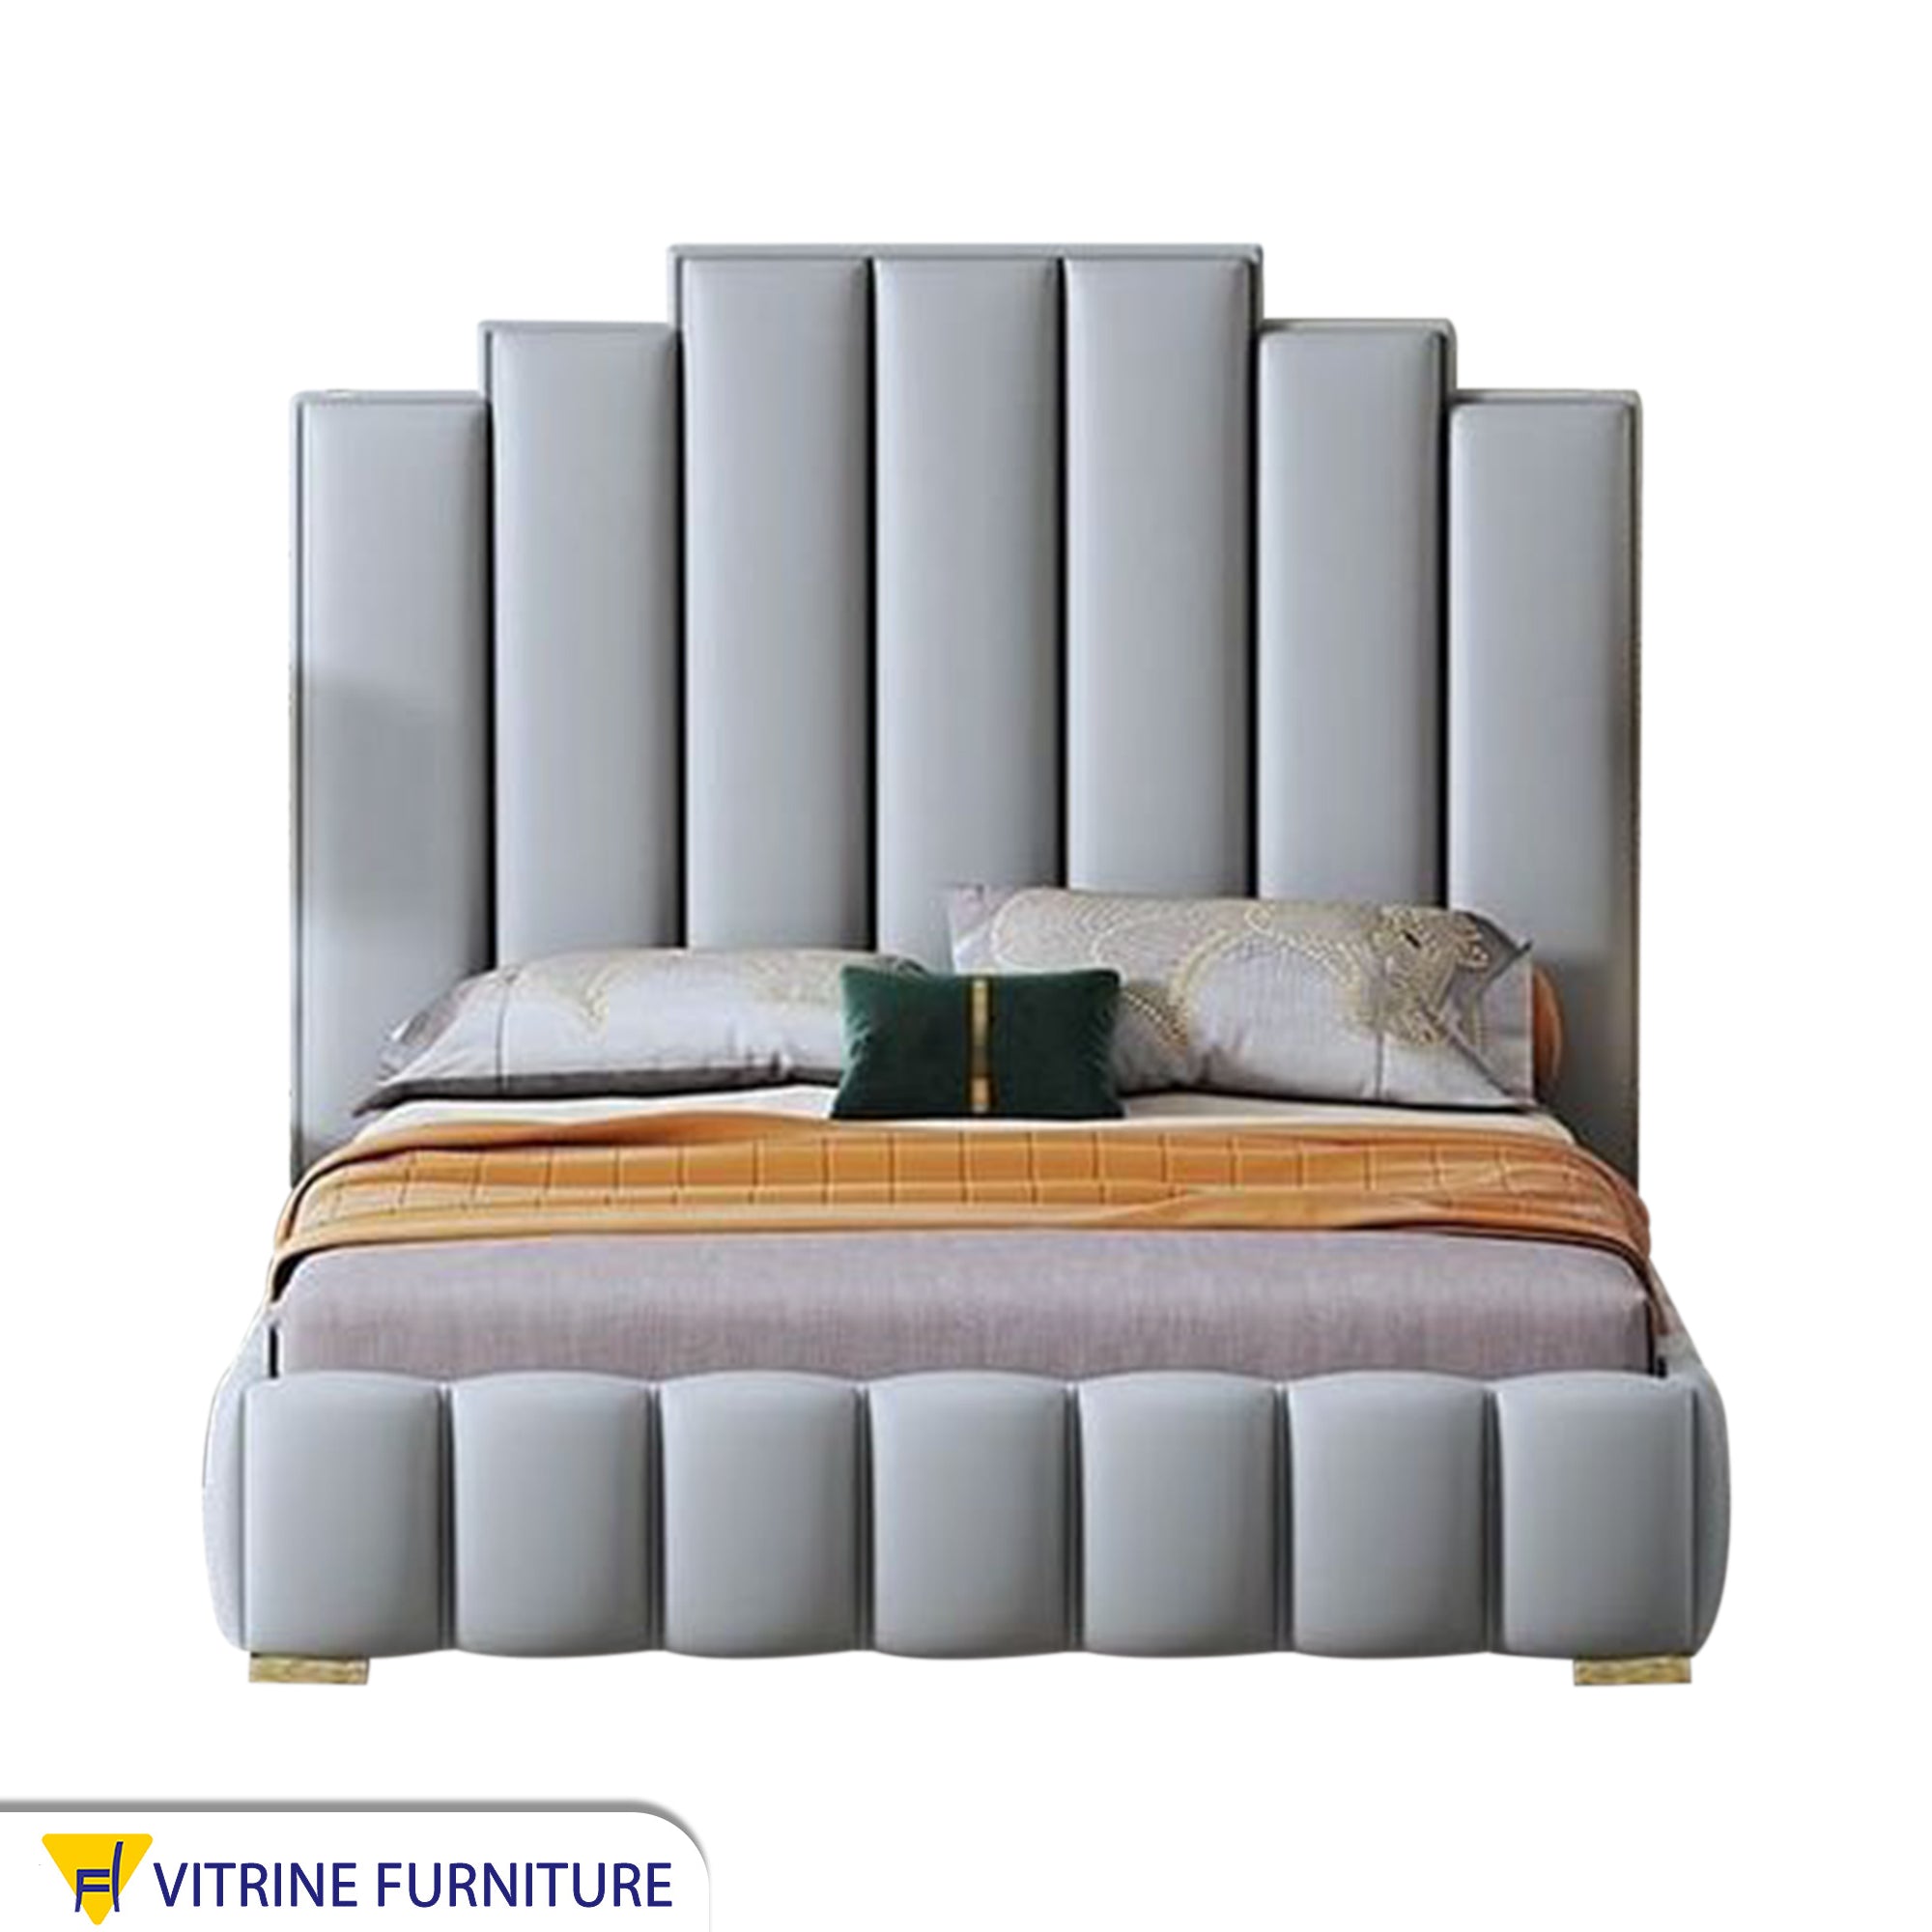 Light gray bed with a unique headboard